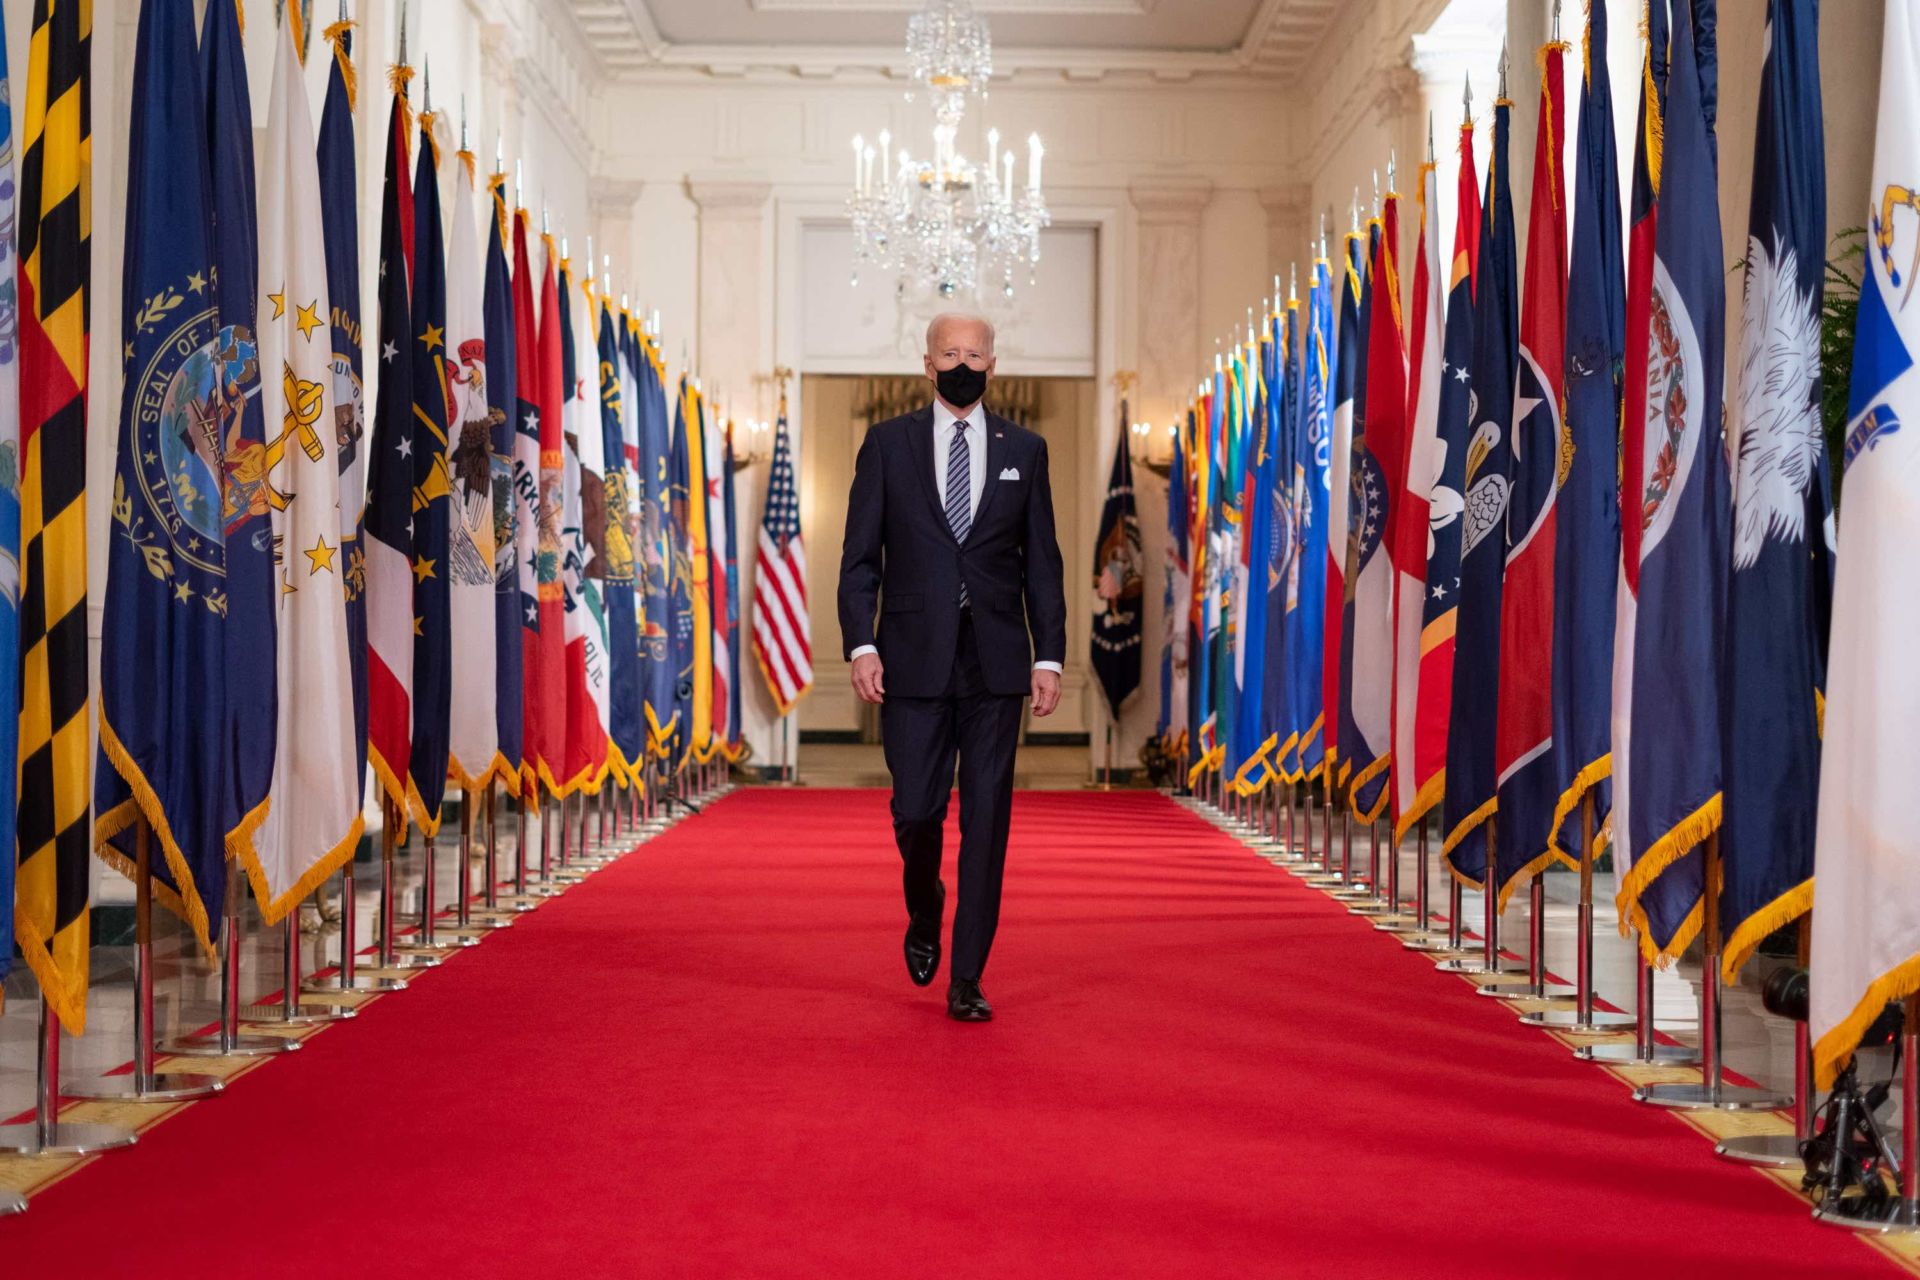 President Joe Biden walks from the State Dining Room of the White House to a podium in the Cross Hall of the White House Thursday, March 11, 2021, to deliver remarks on the one year anniversary of the COVID-19 Shutdown. (Official White House Photo by Adam Schultz)